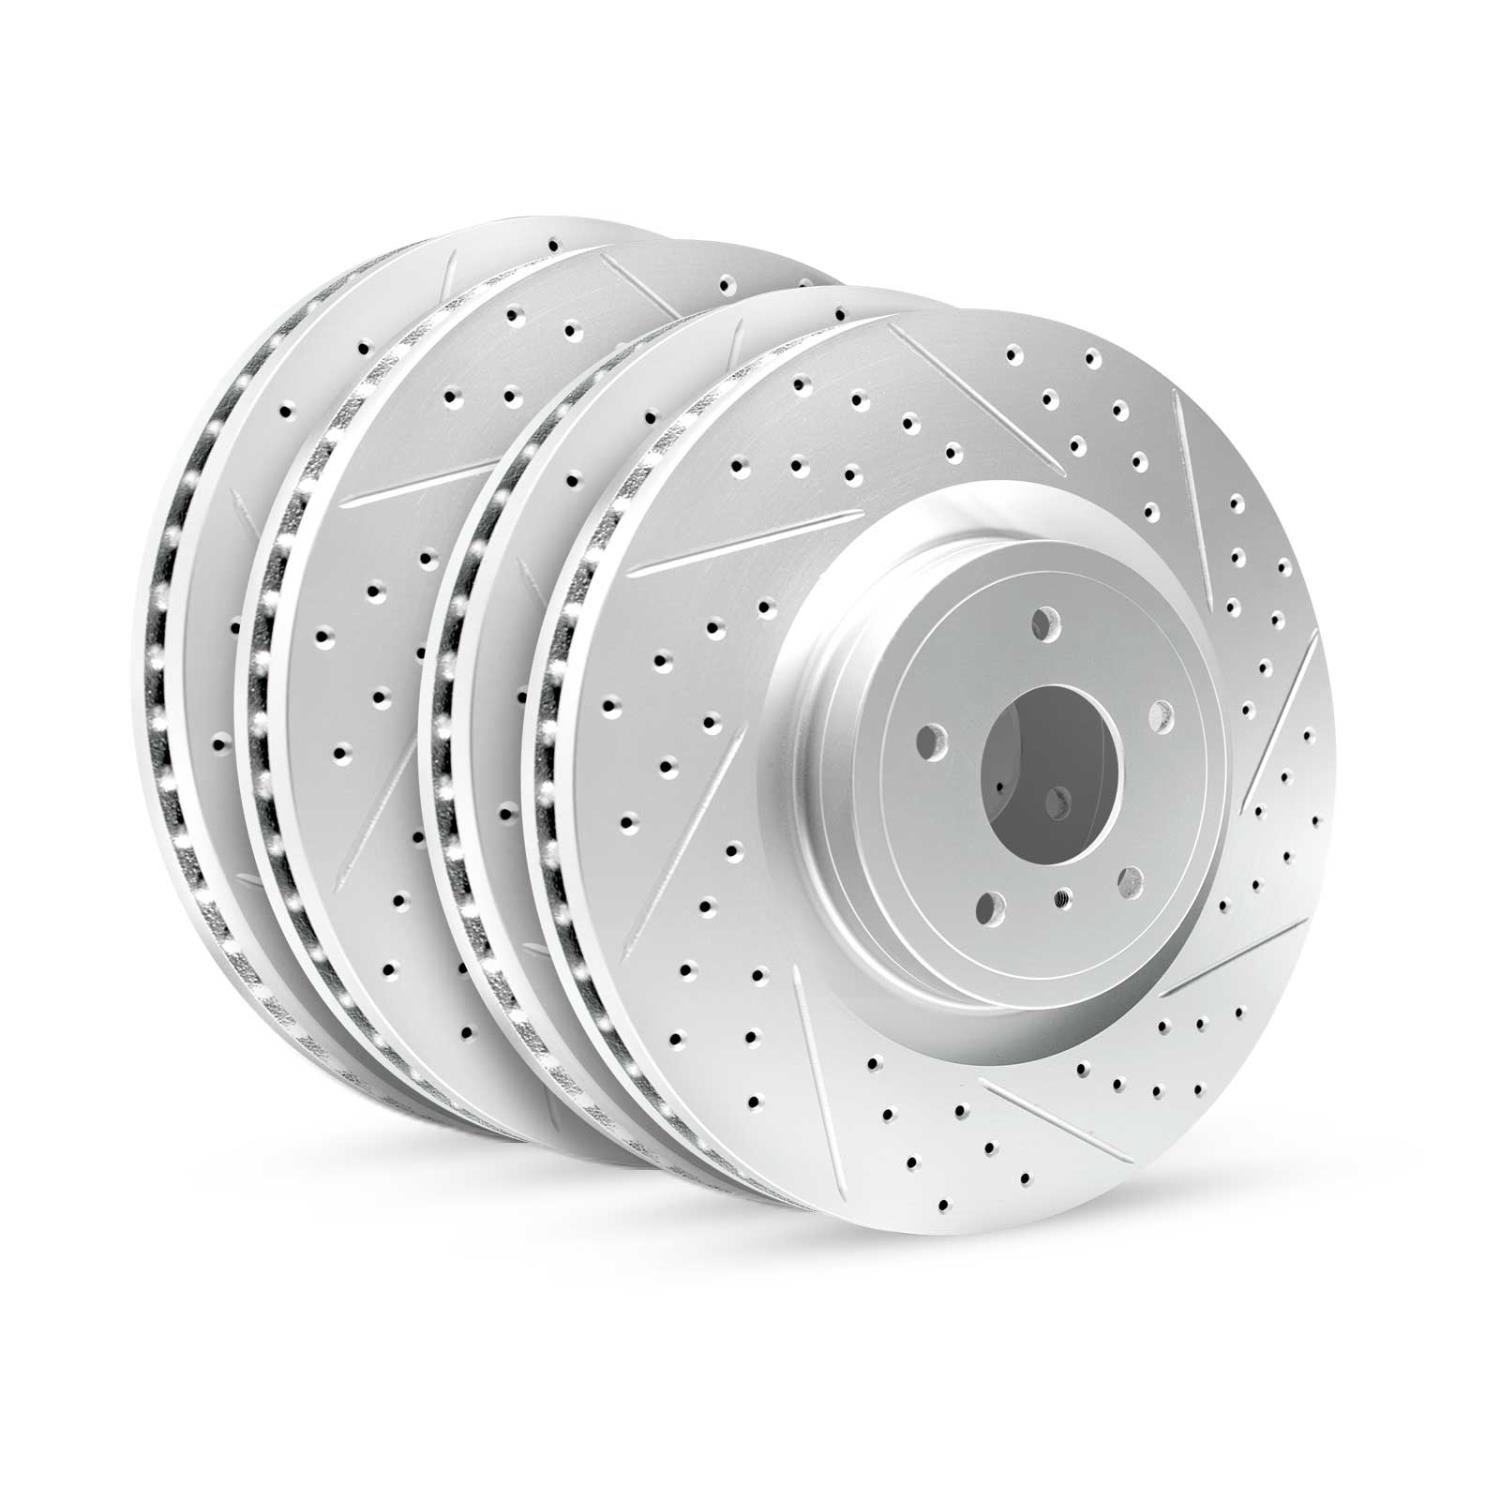 GEO-Carbon Drilled/Slotted Rotors, 2012-2016 Subaru, Position: